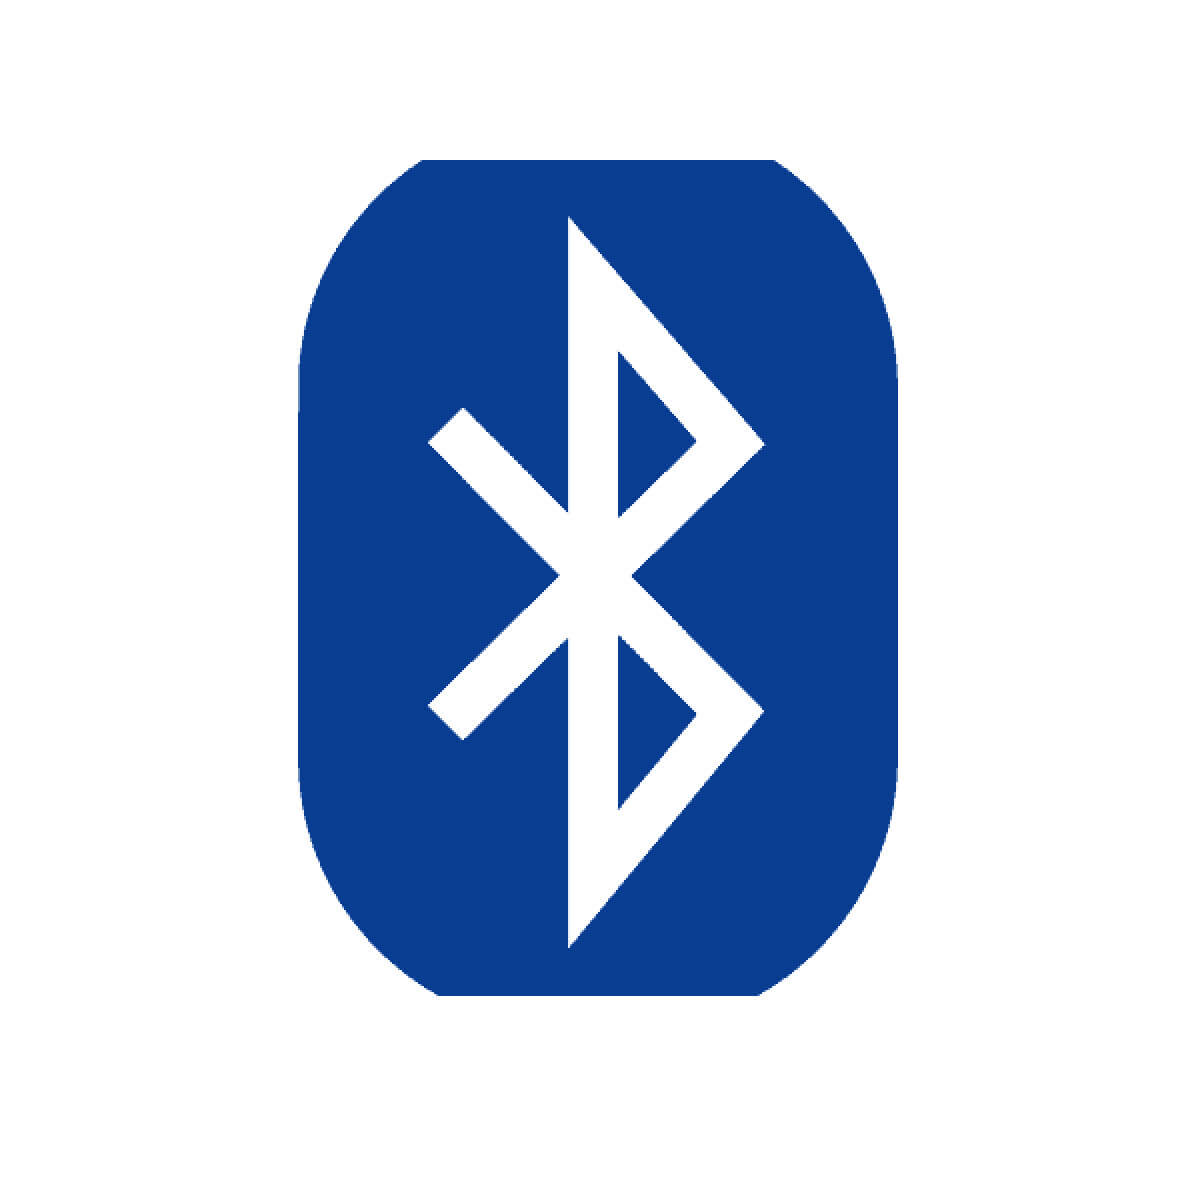 KB4494441 Bluetooth issues